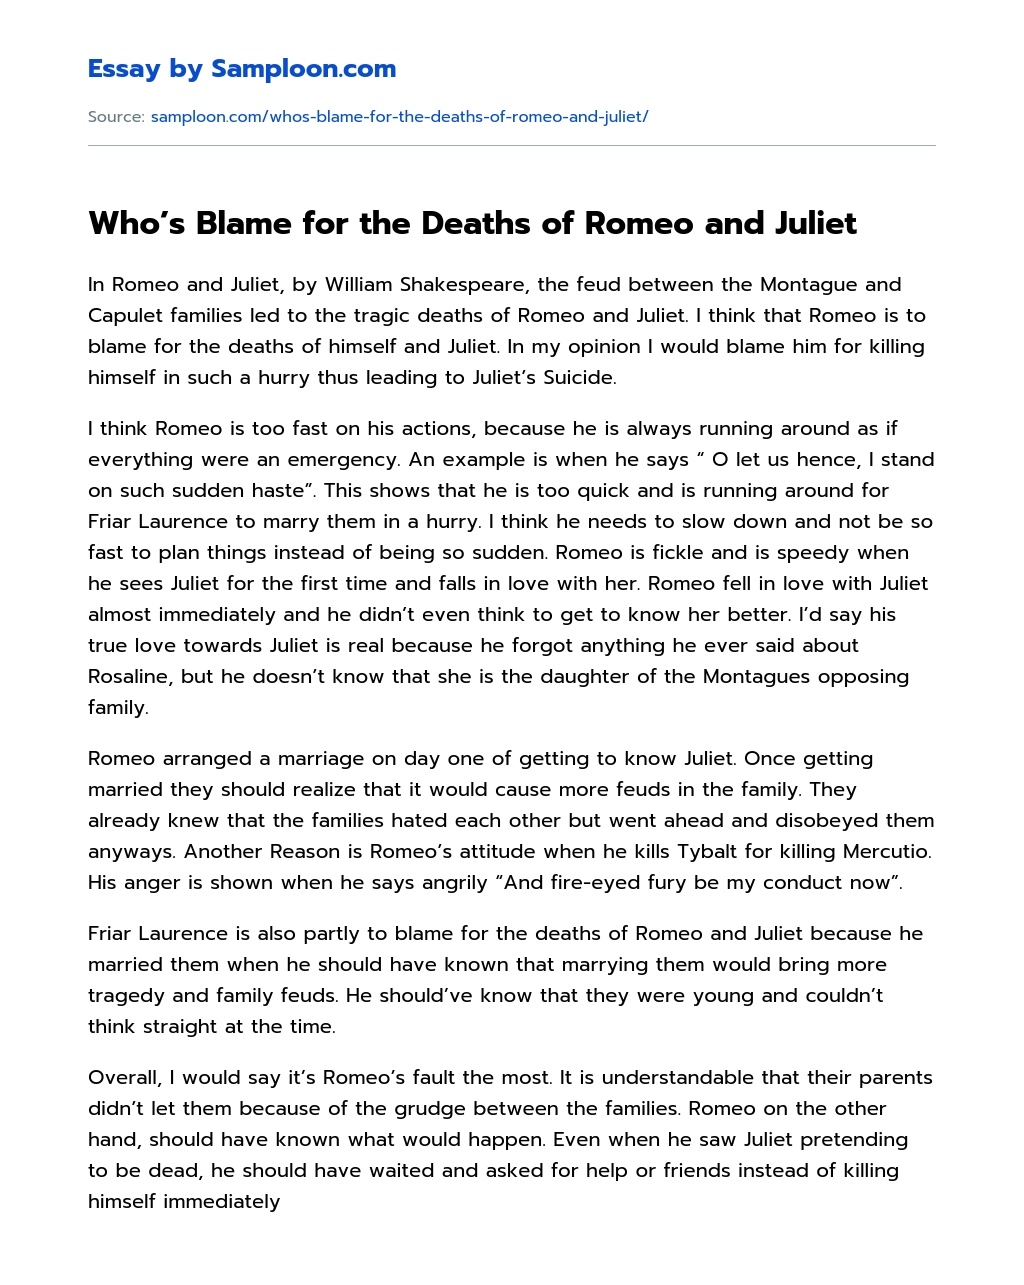 romeo and juliet family feud essay